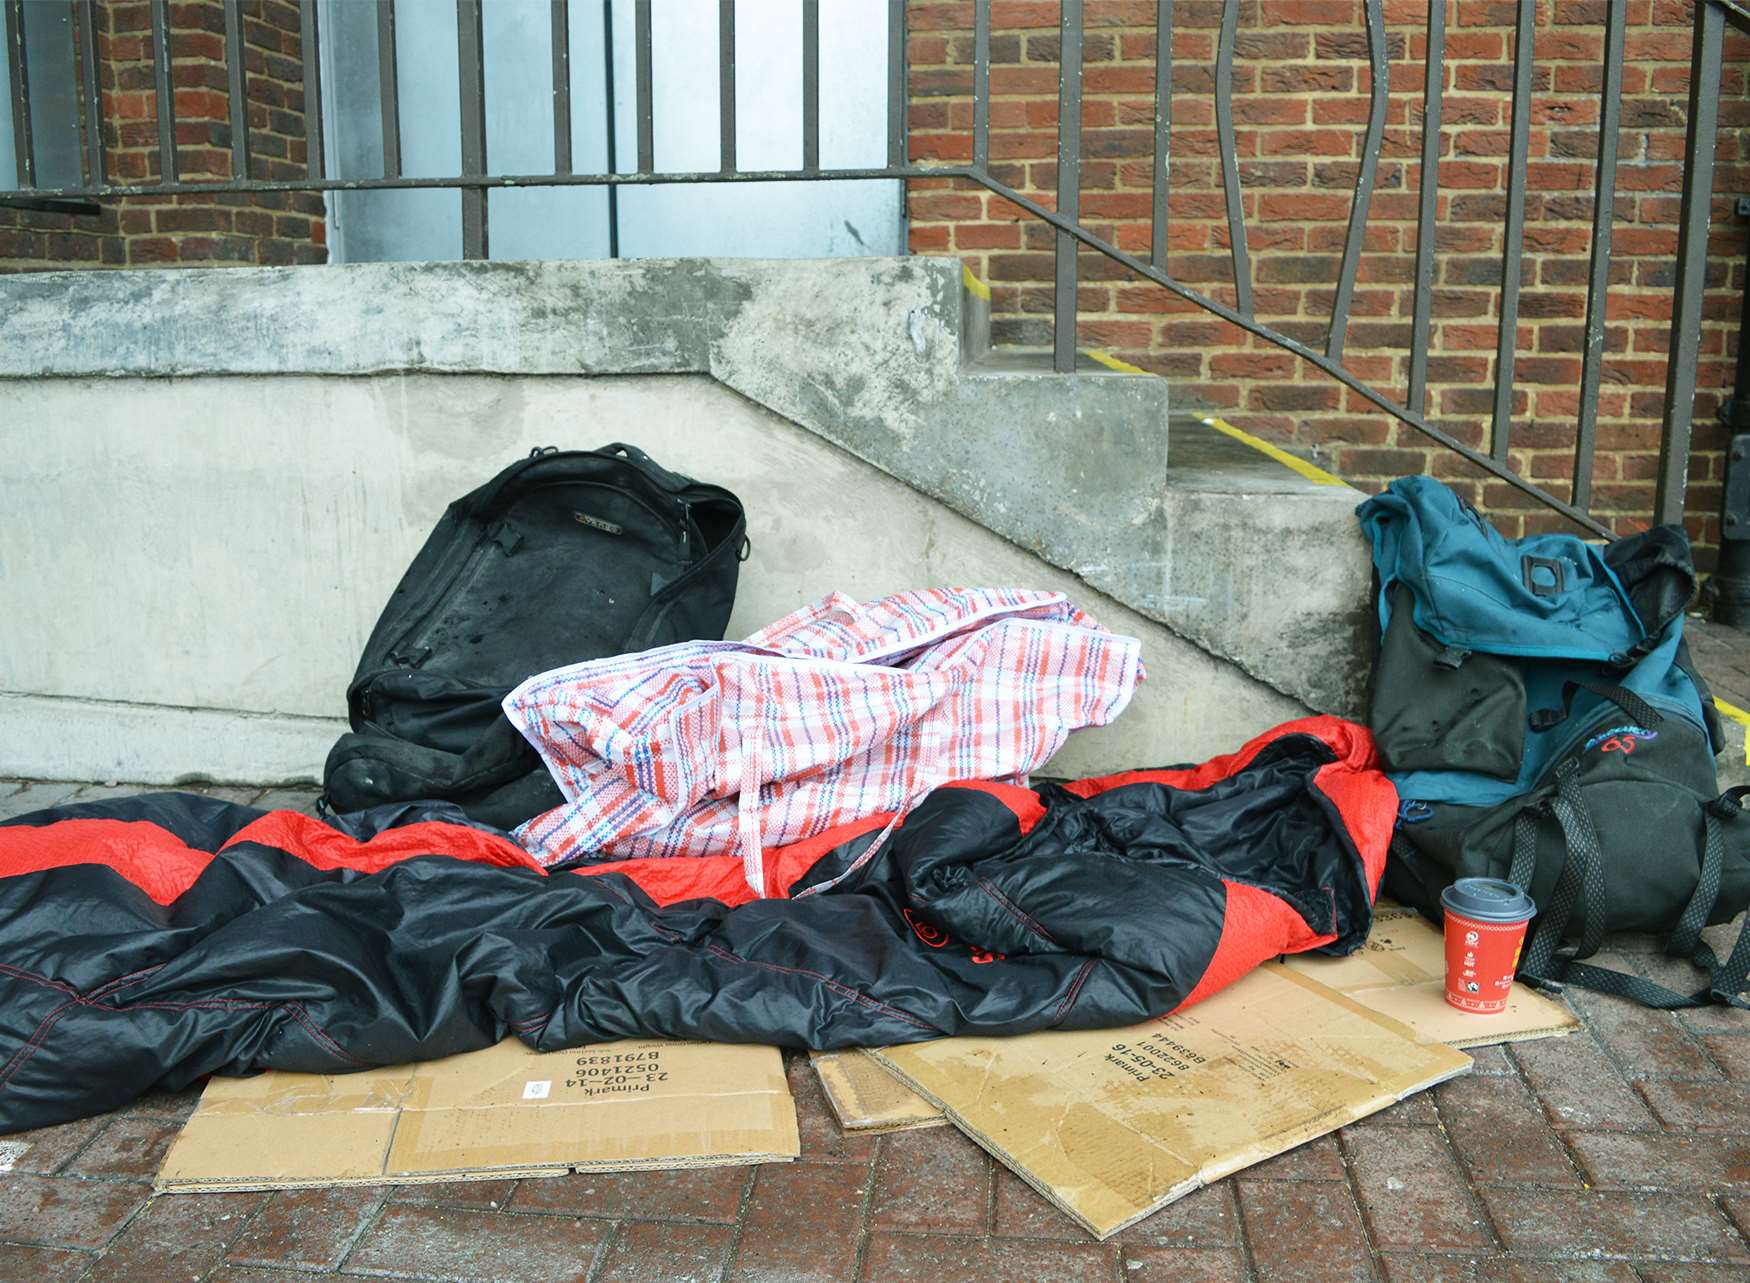 Extreme weather conditions are putting homeless people at serious risk.